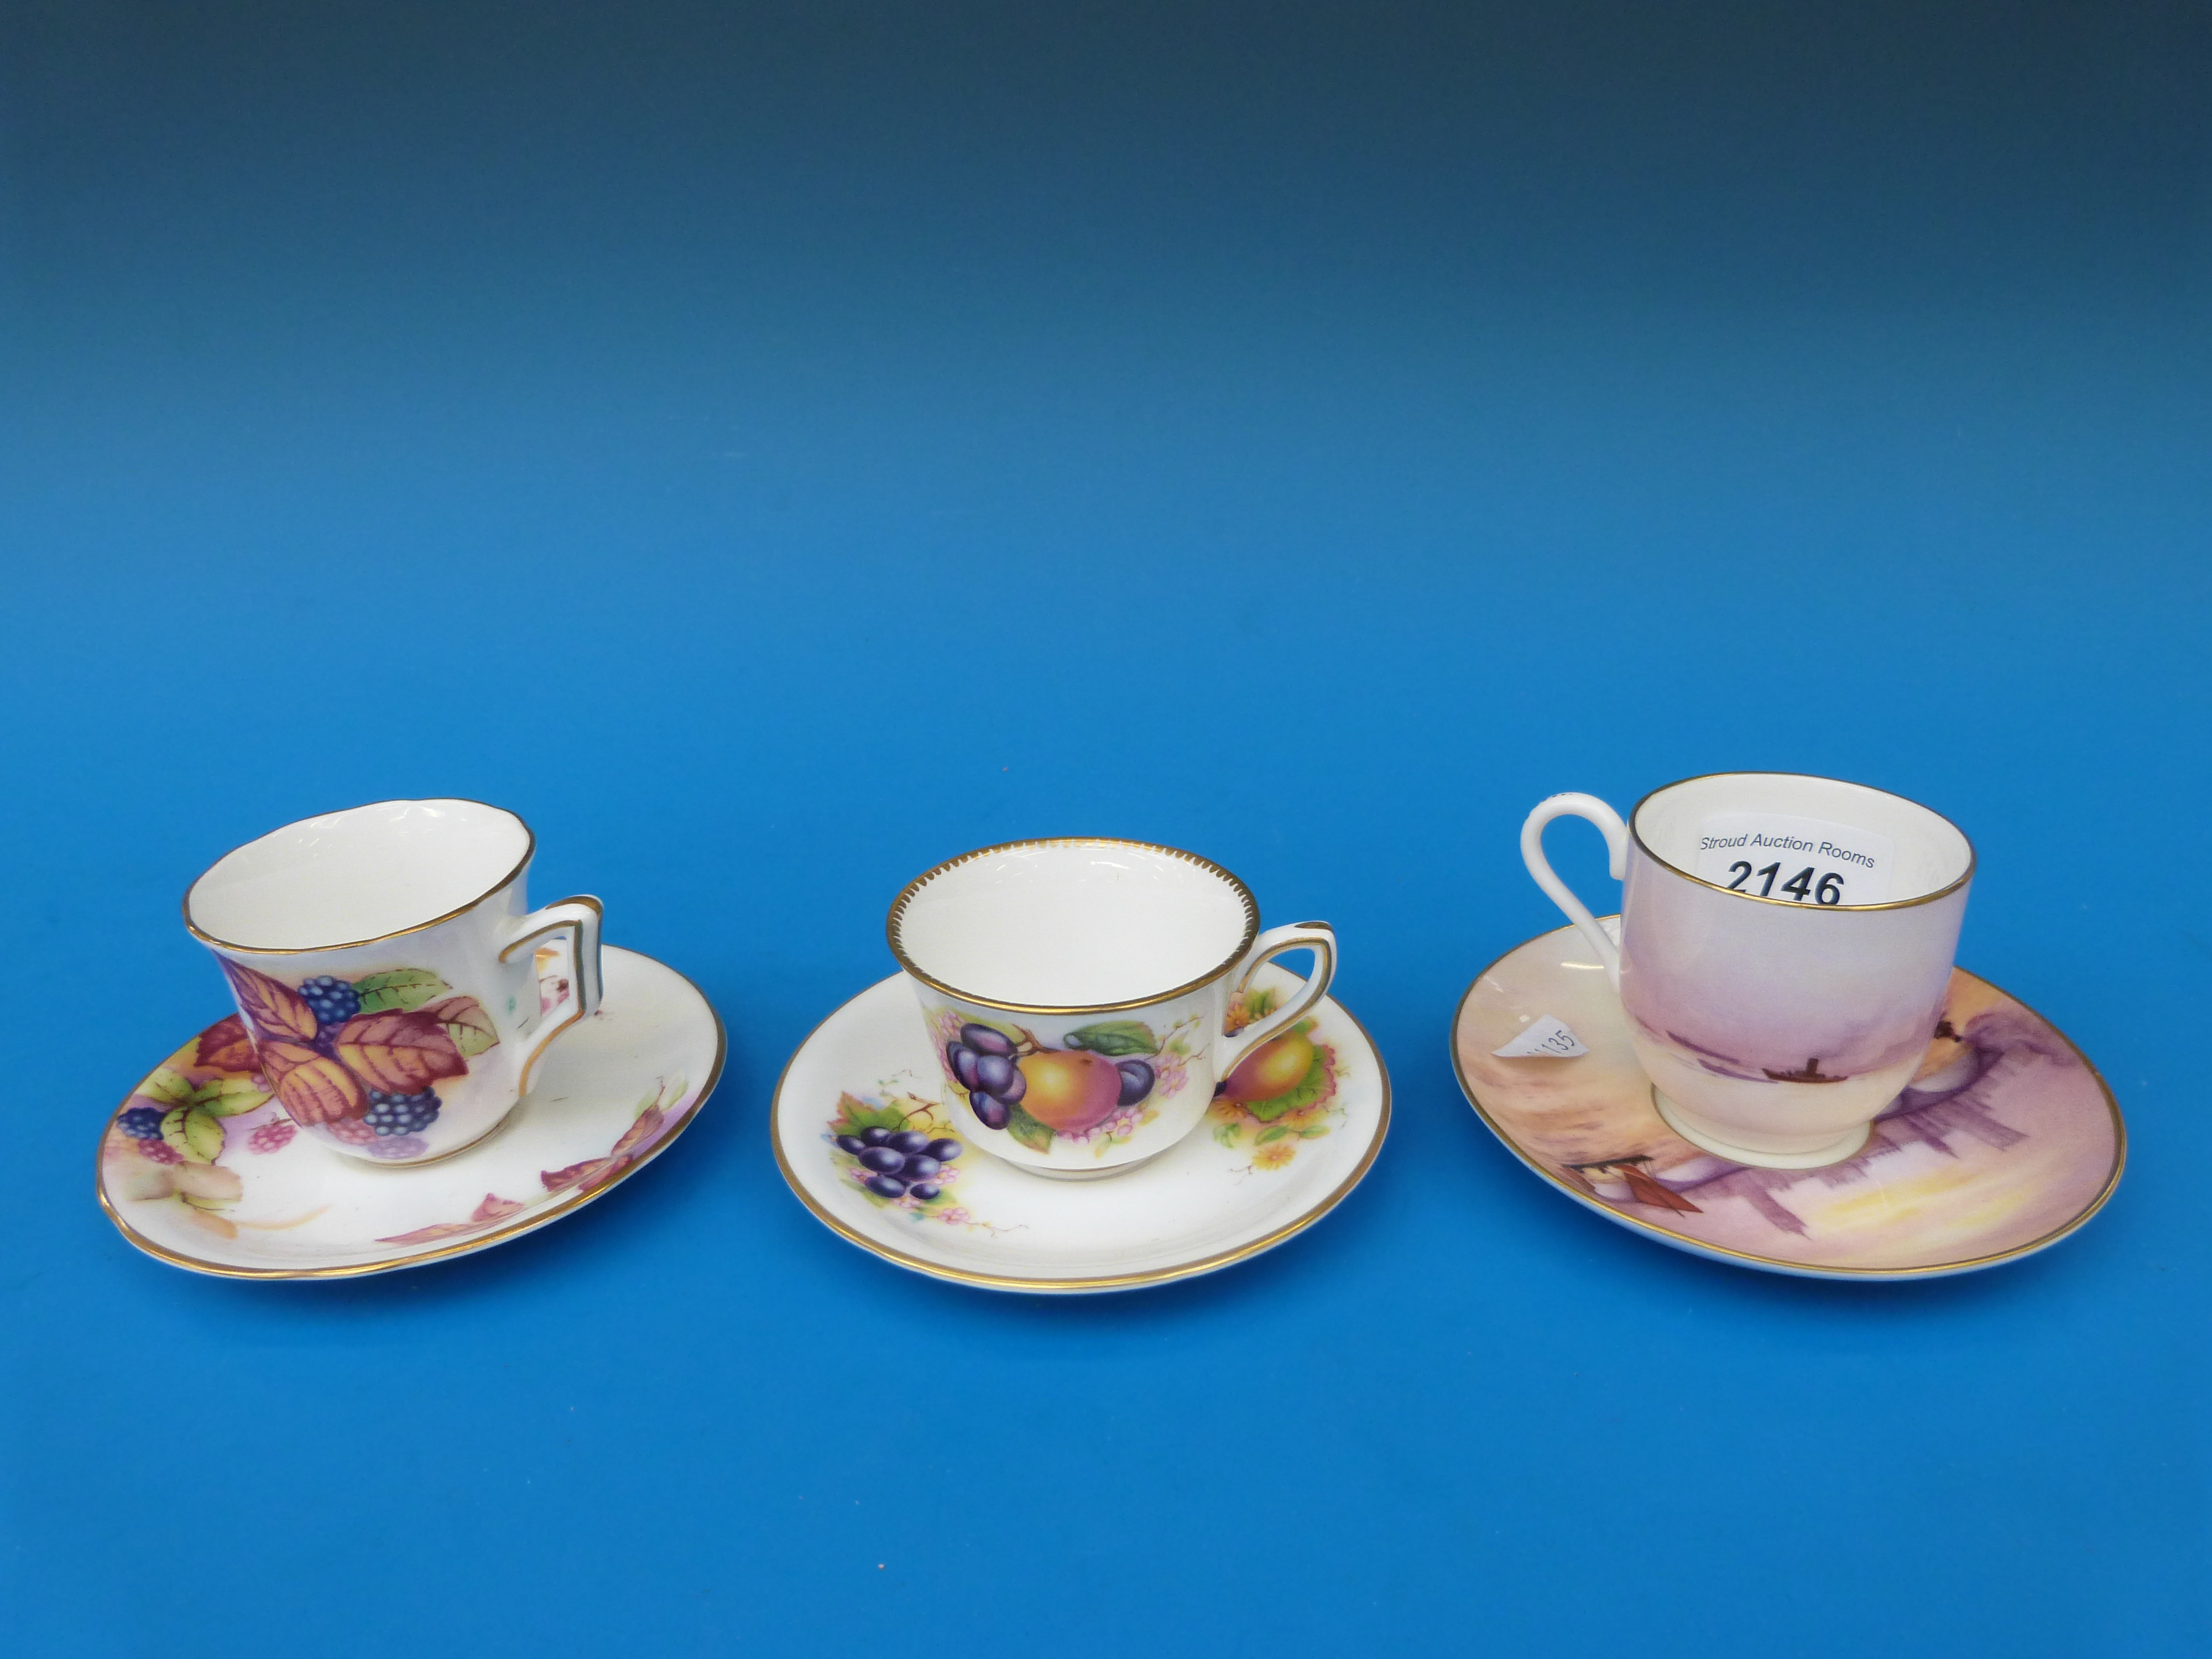 A large quantity of Royal Worcester decorative cups and saucers reviving old patterns - Image 3 of 3